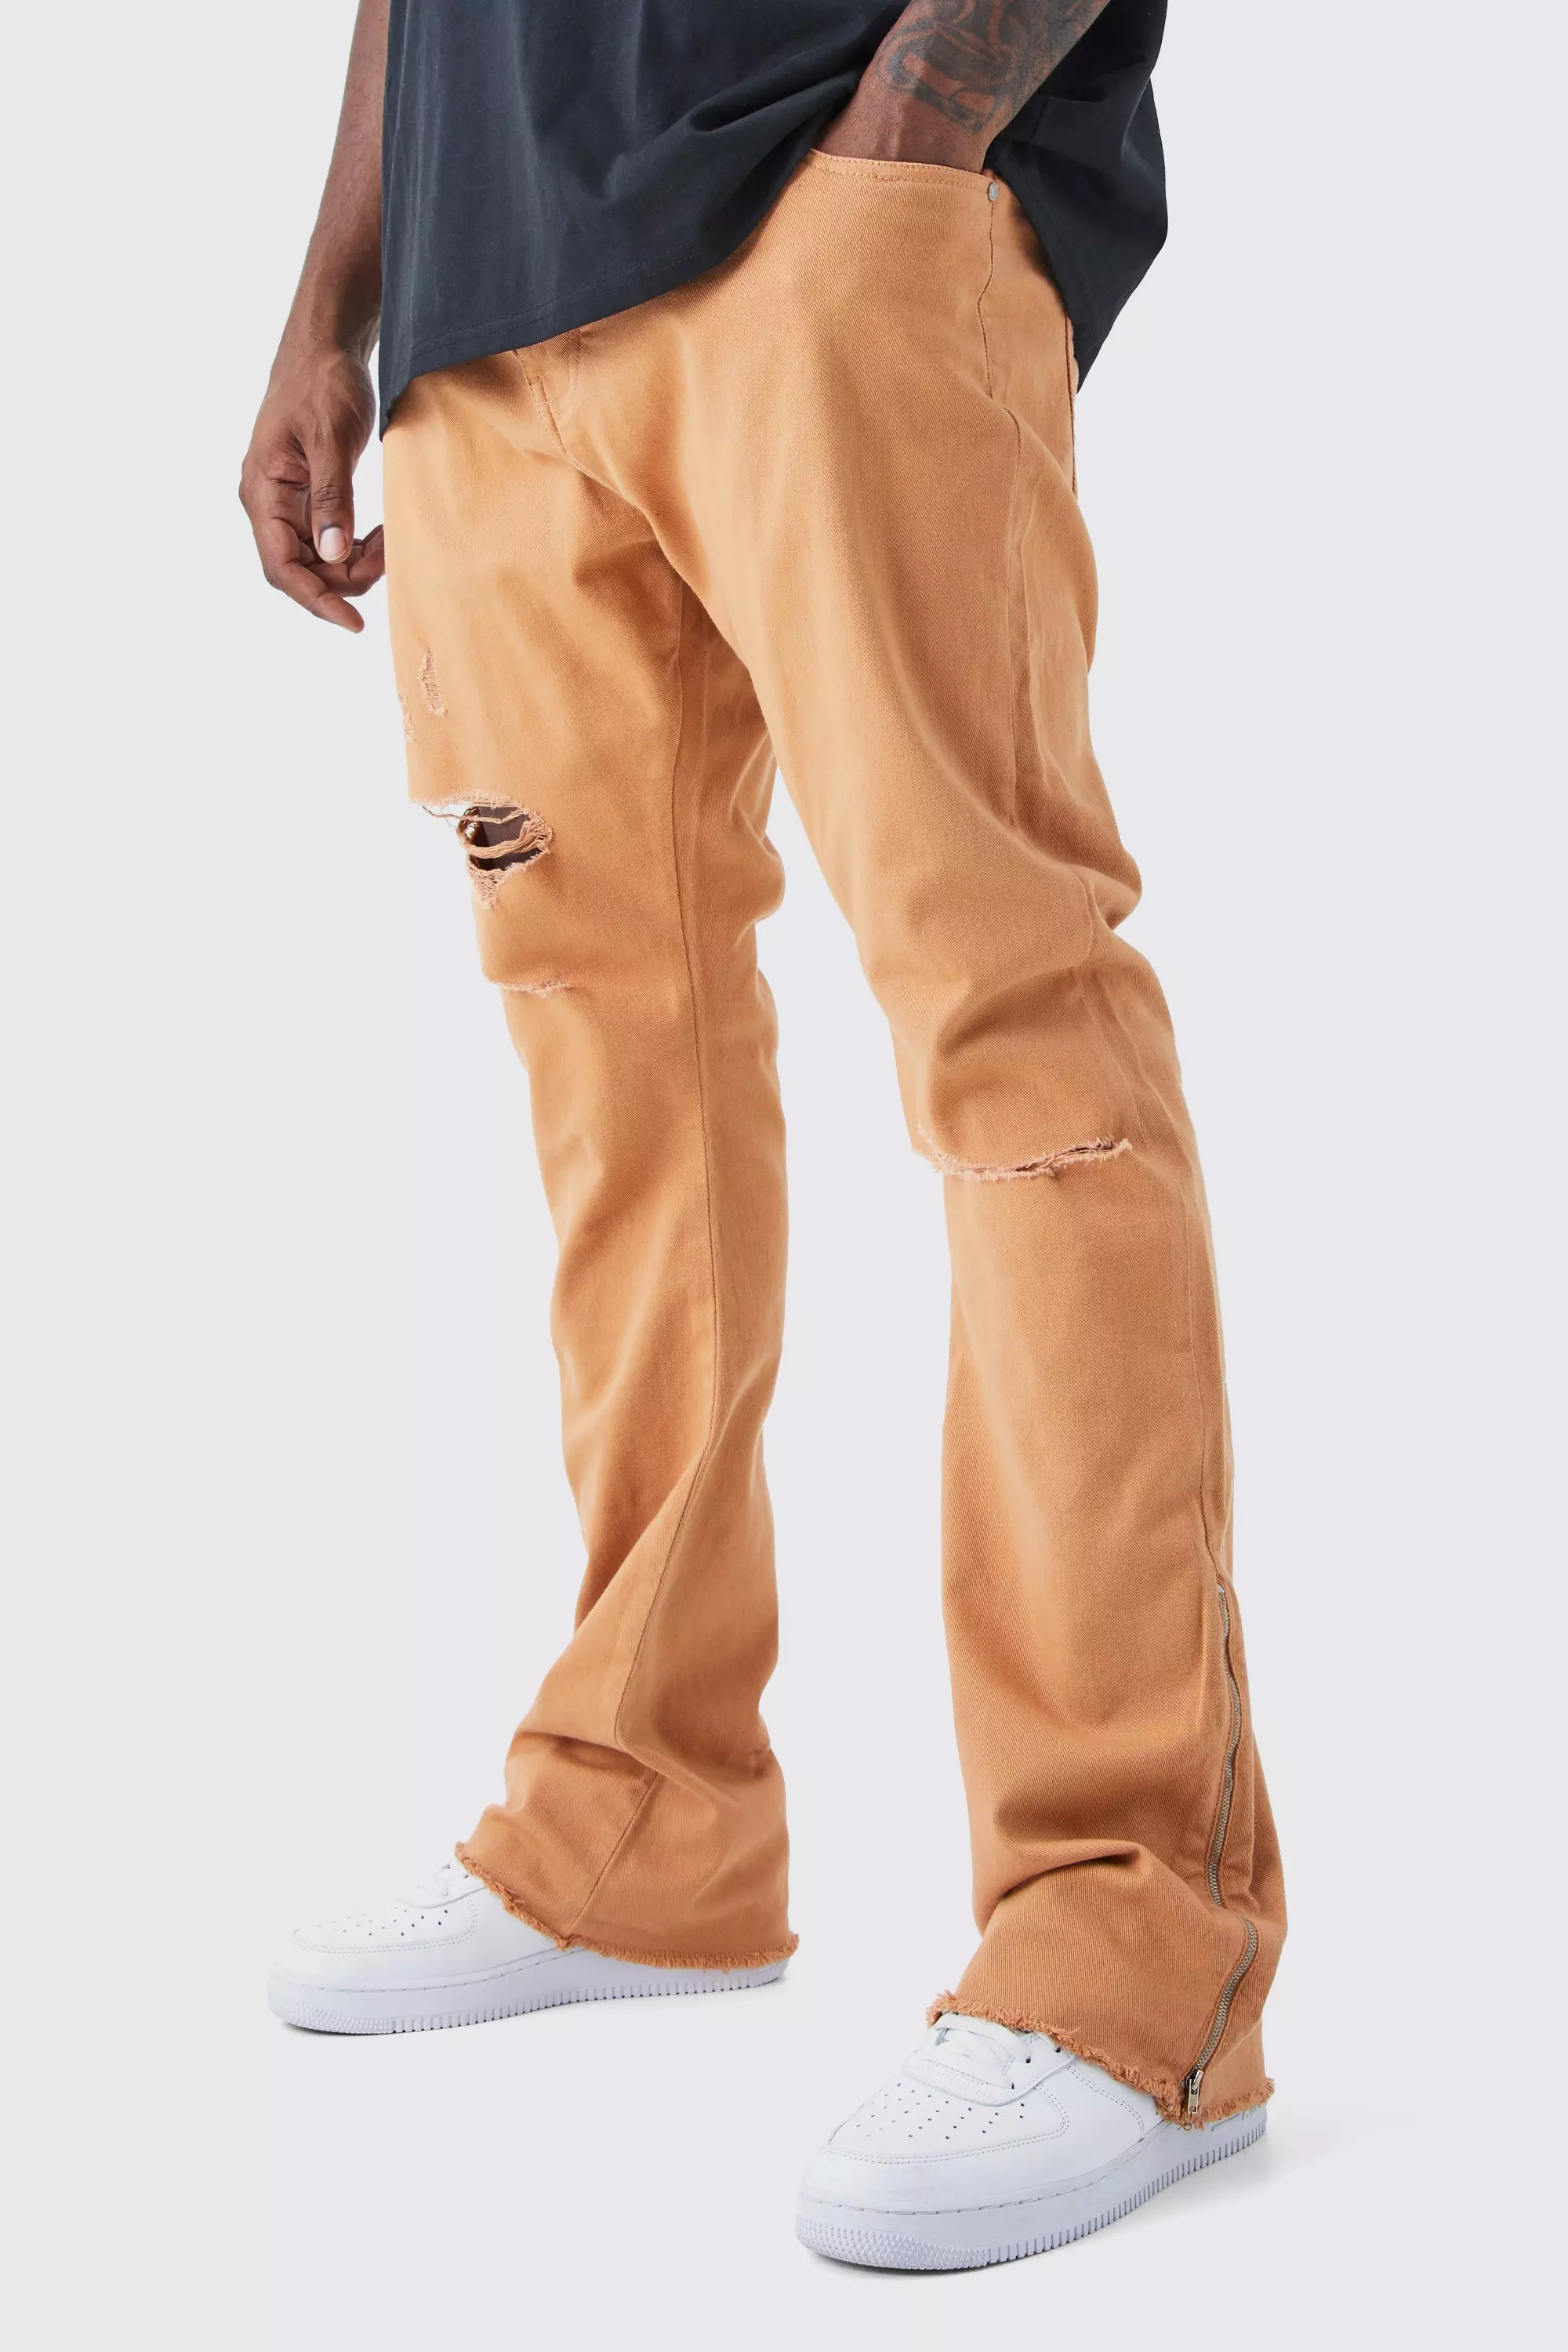 Cargo pants: this pants trend will soon be replacing jeans